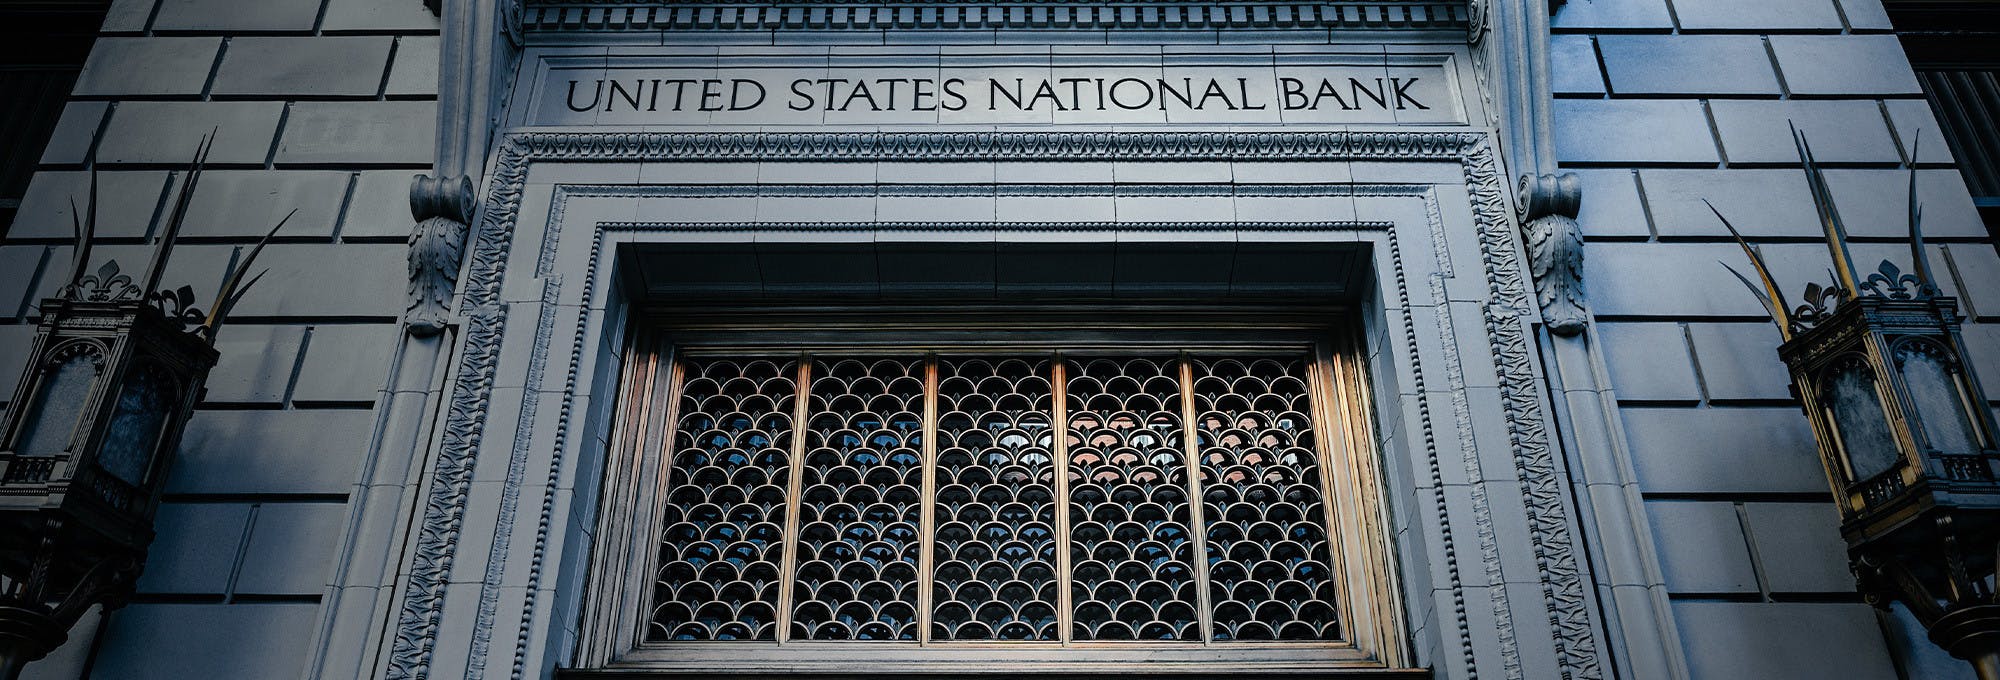 Photo of front of United States National Bank which helps represent where student loans come from